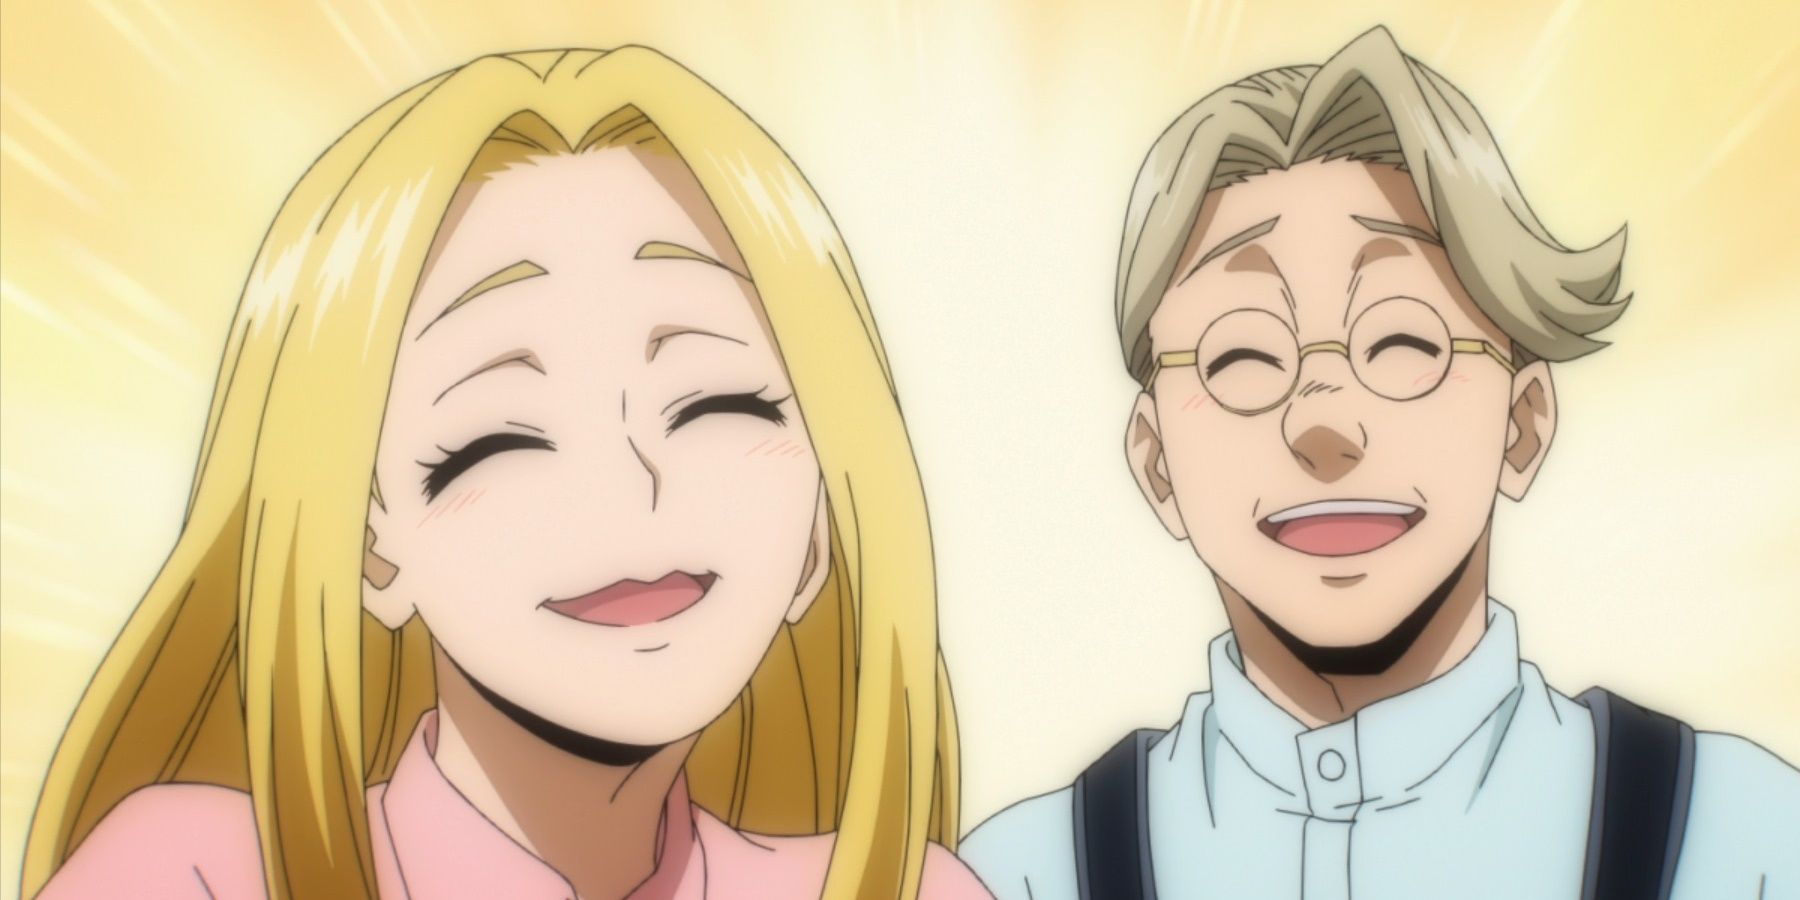 yuga aoyama's parents look happy against a yellow background